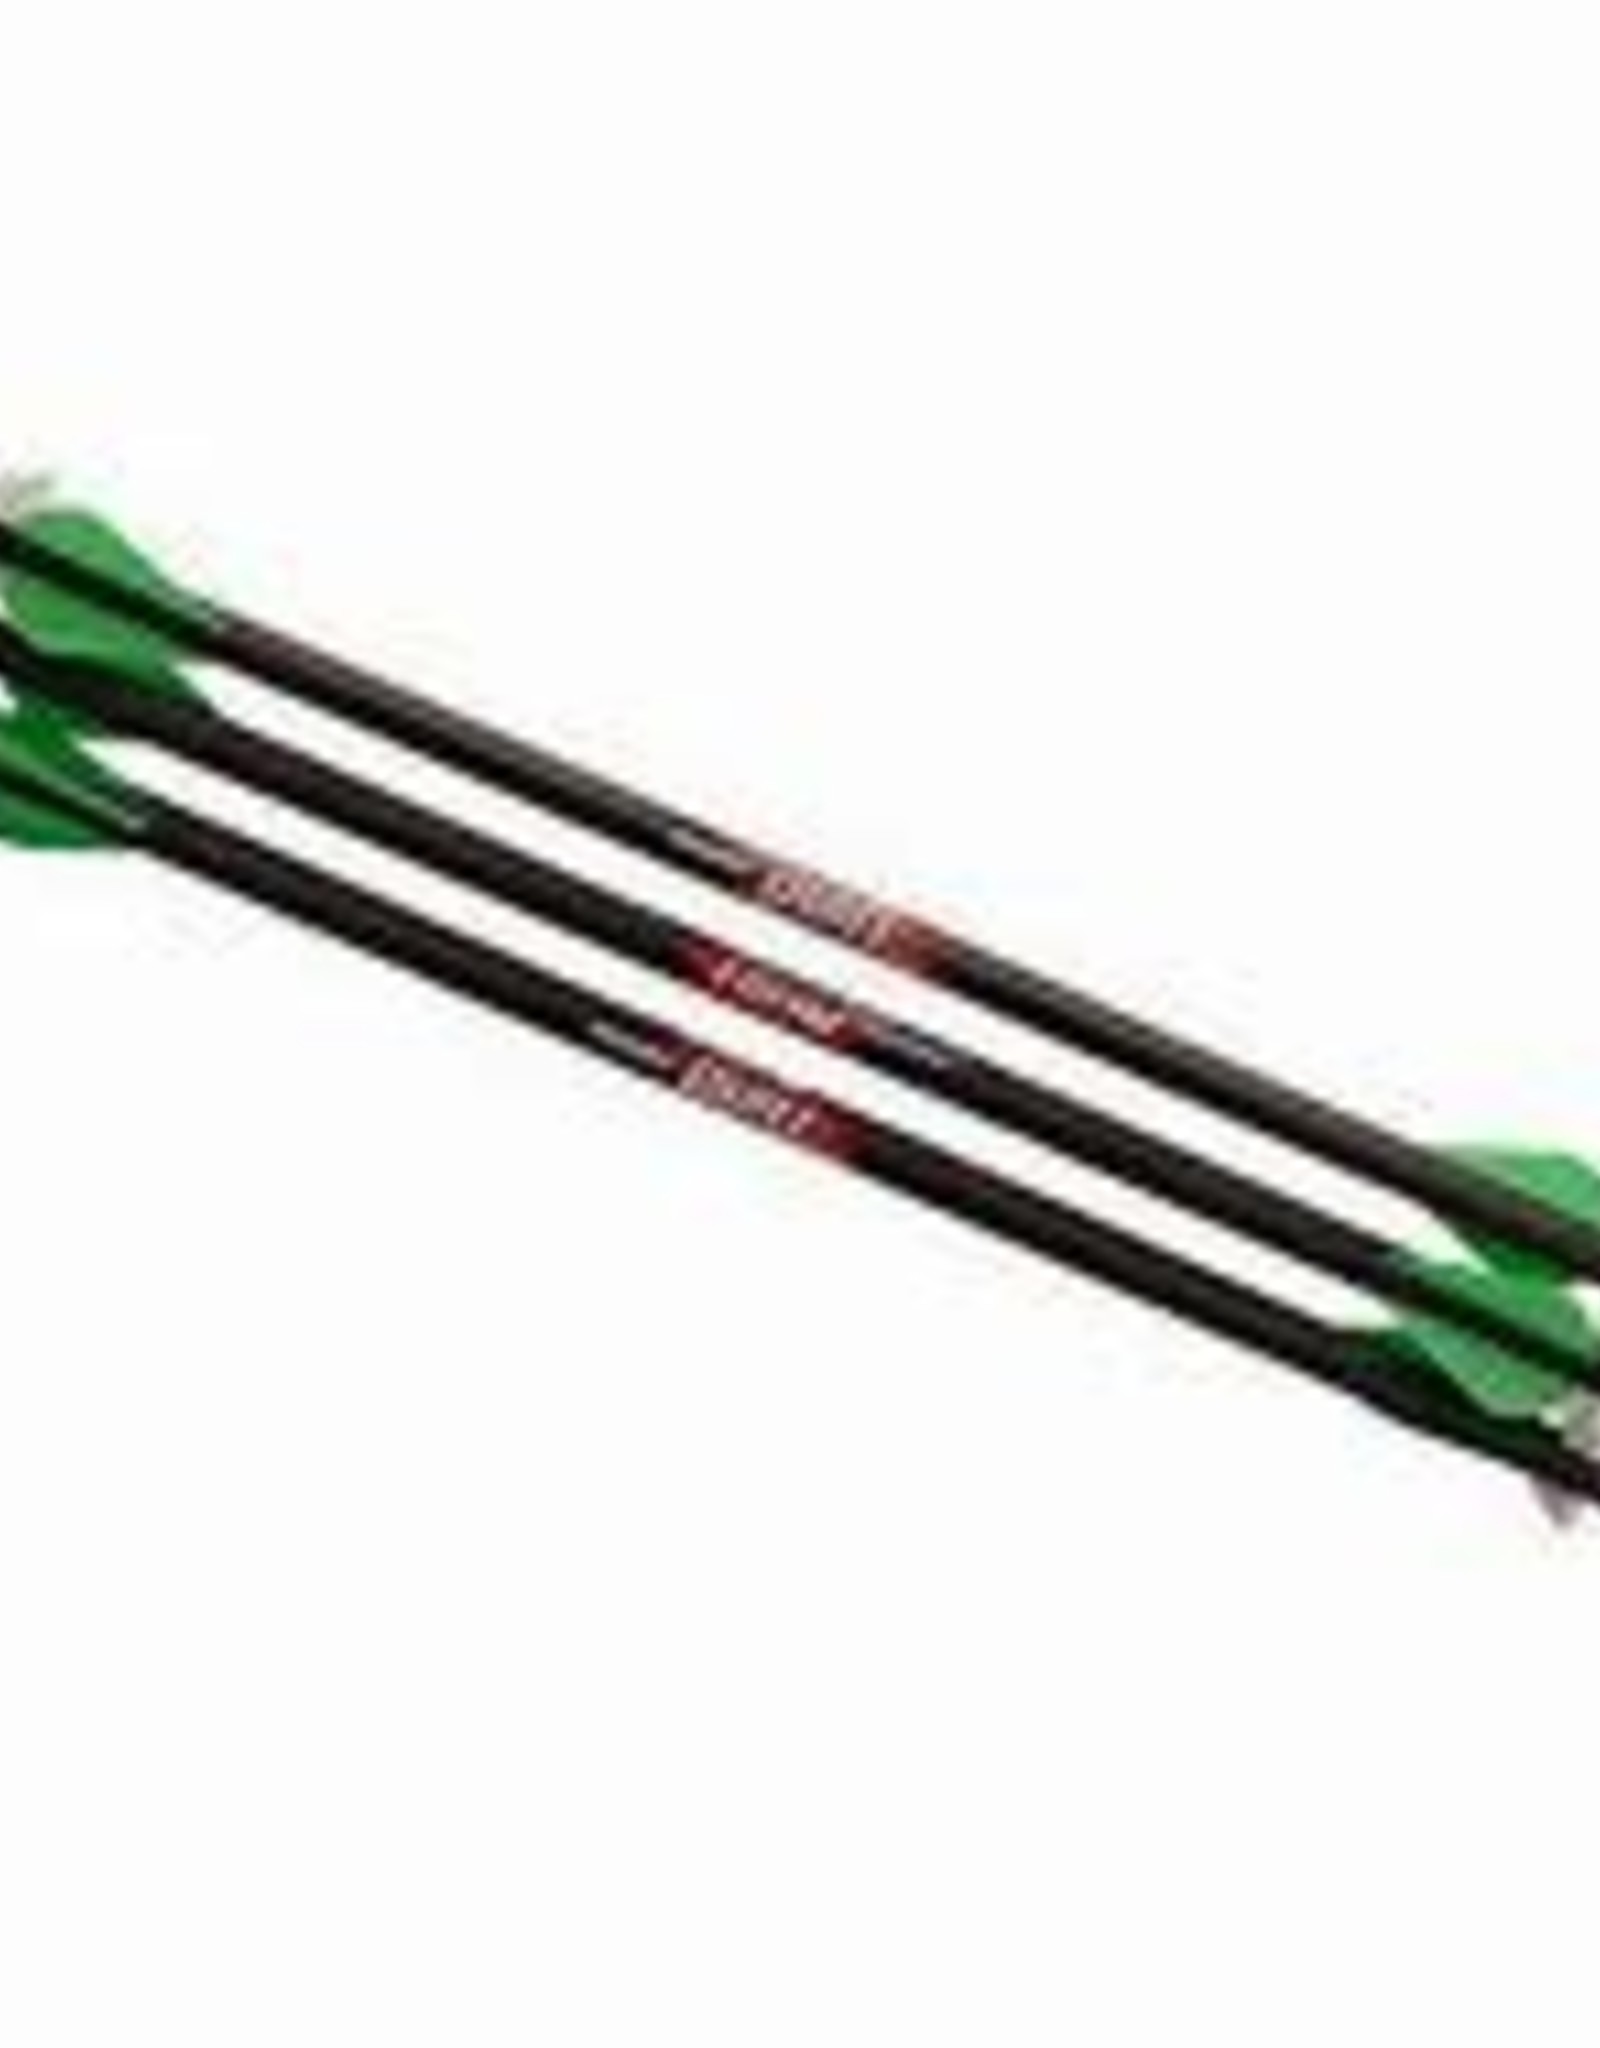 Excalibur Quill 16.5" Crossbow Arrows (6)